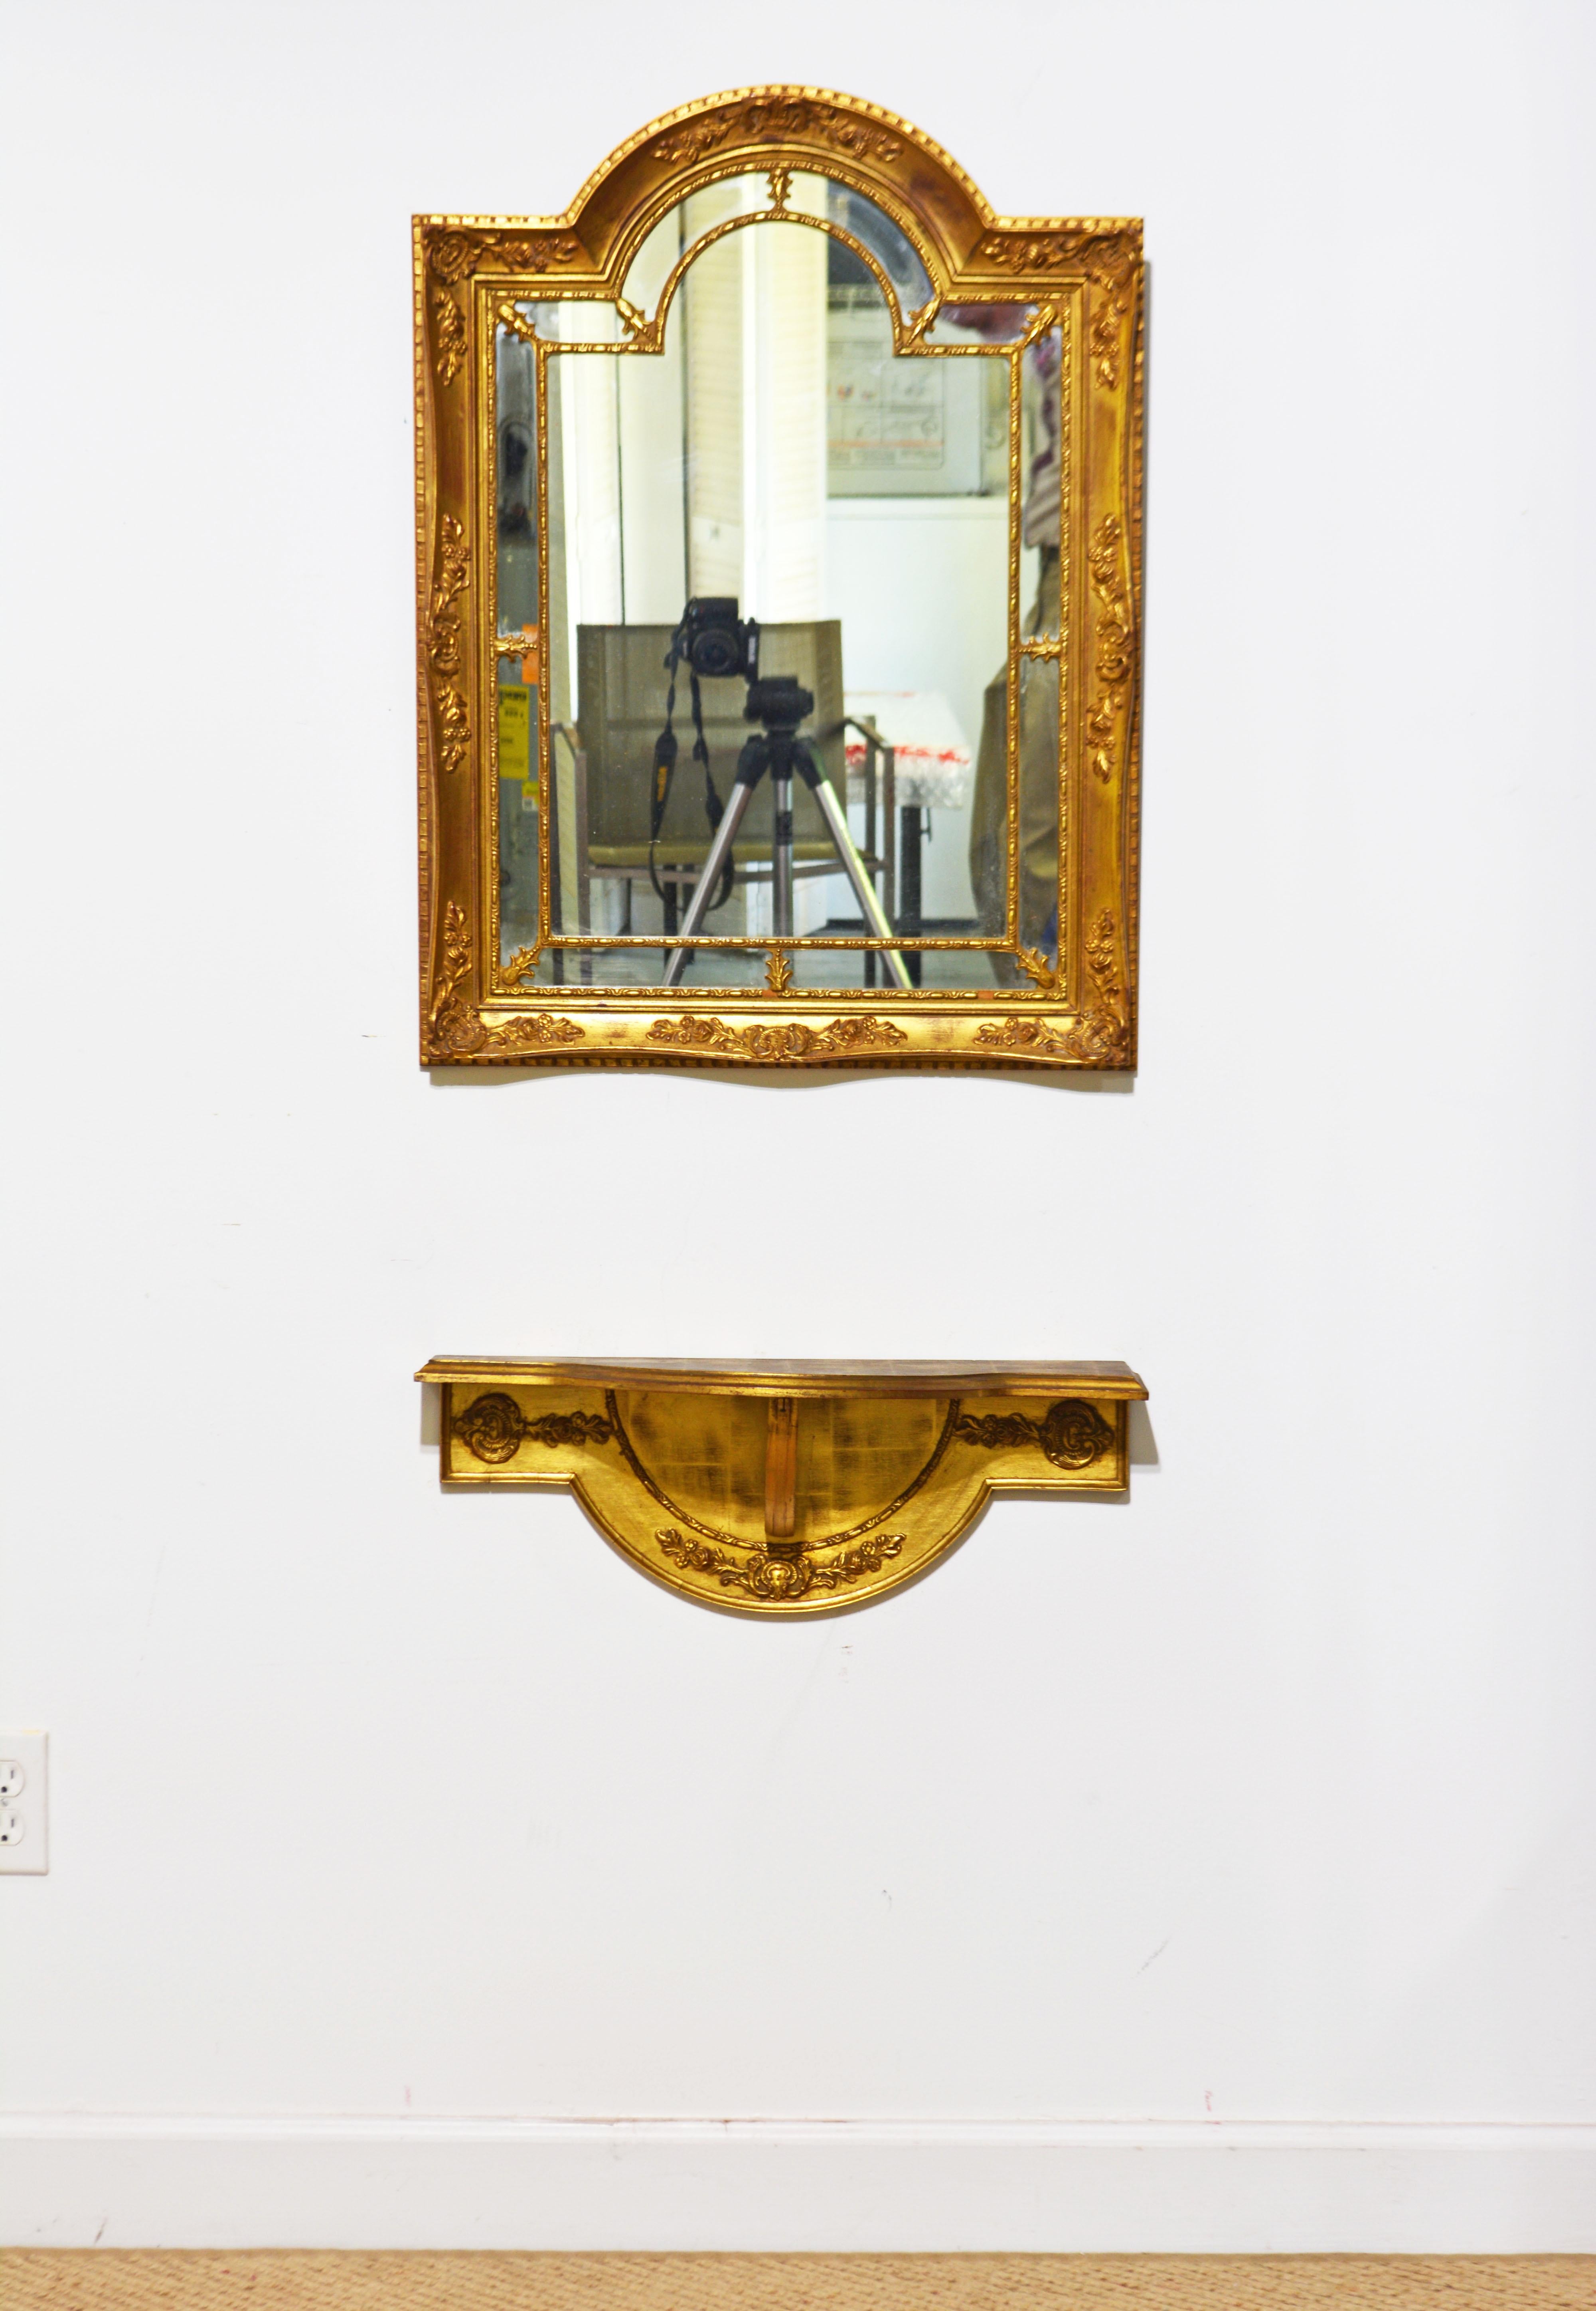 This French Louis XVI style Giltwood Mirror and wall console was made in Belgium for La Barge. It features a beautifully ornate frame with an arched top and the mirror adorned by separate inner mirror panels. We find the arch motif repeated in the